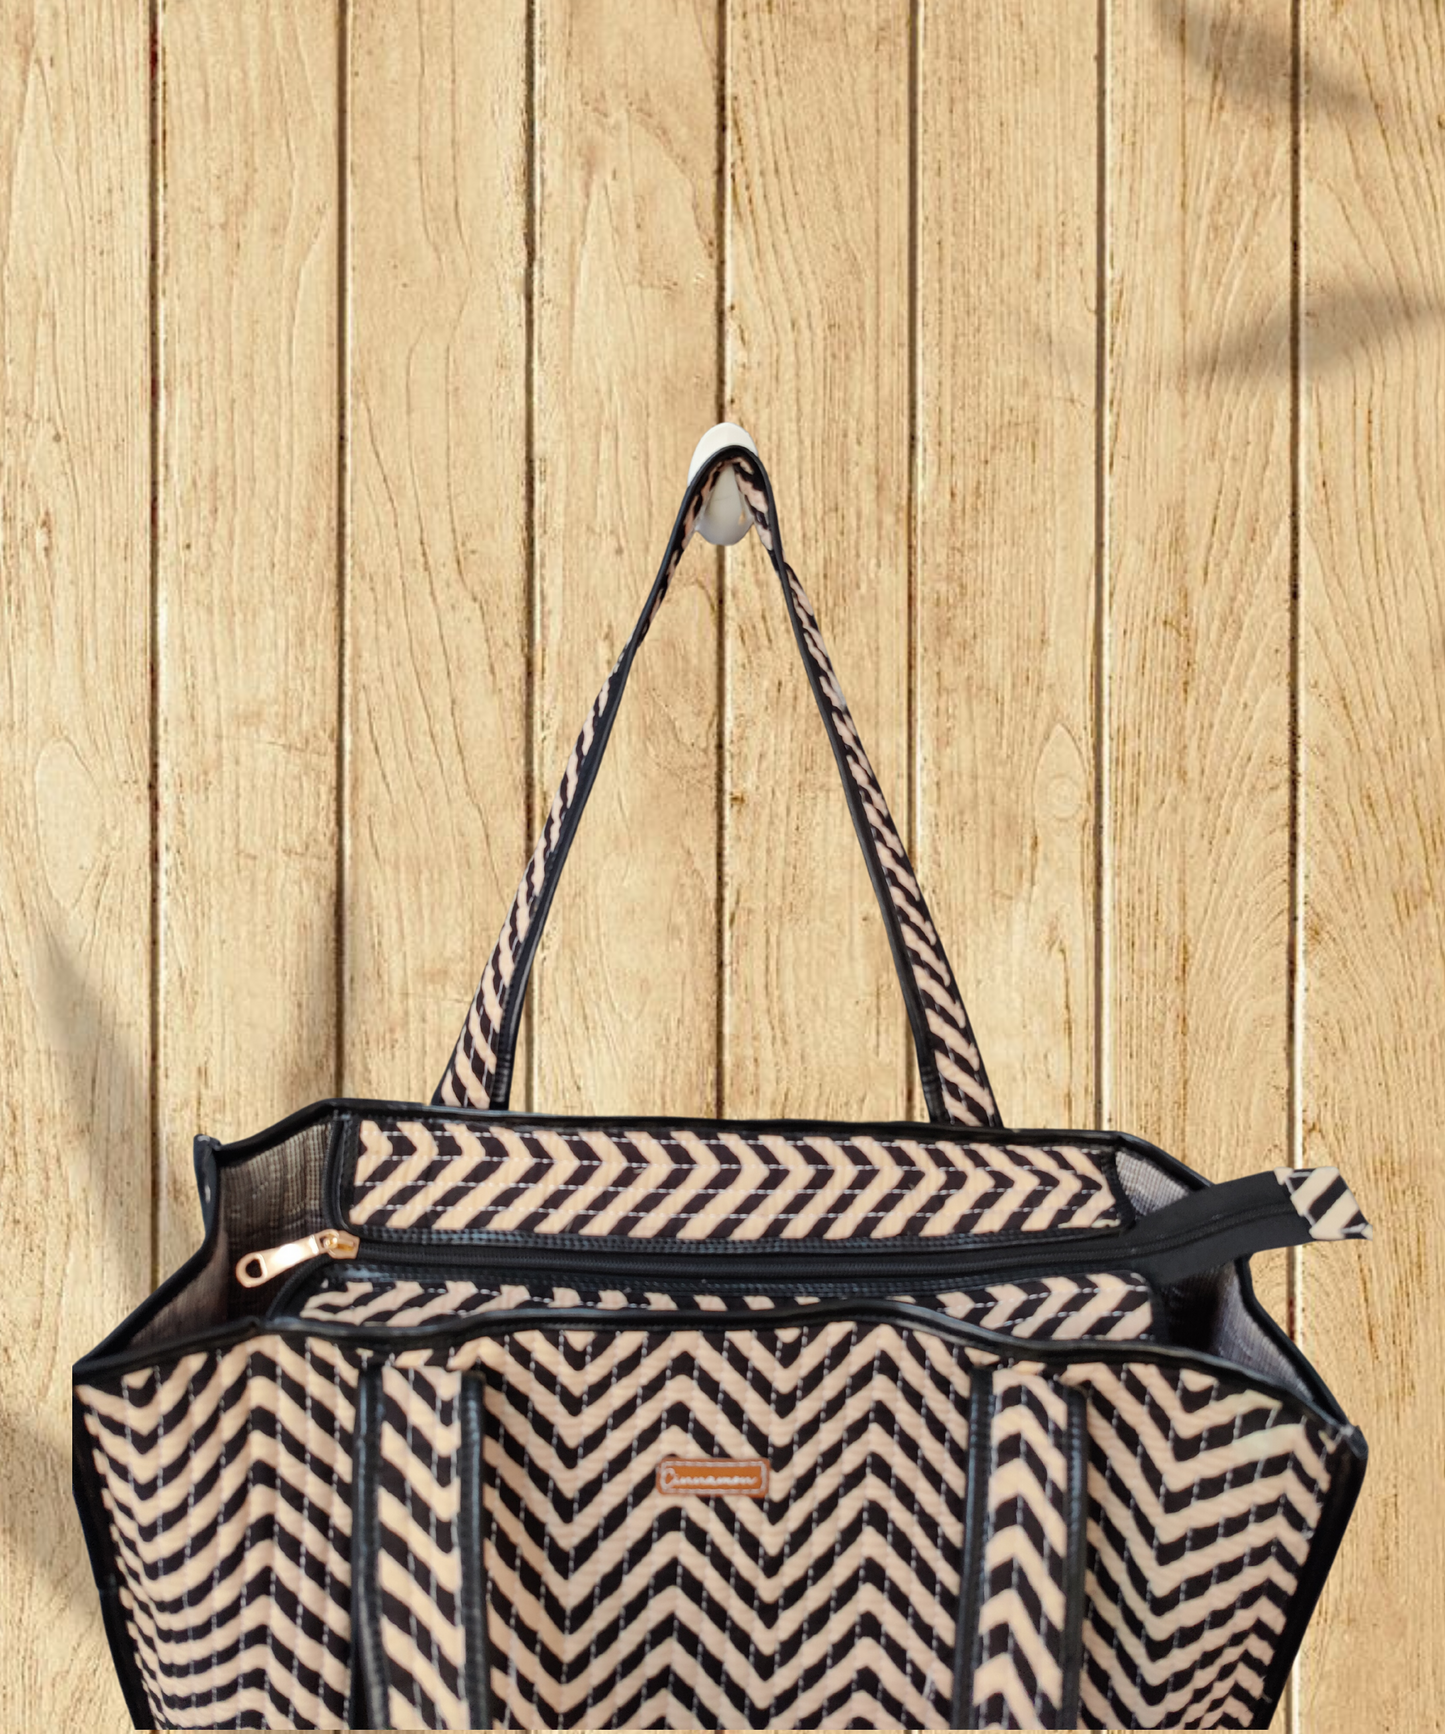 Zig Zag Stripes Cotton Quilted Tote Bag with zipper